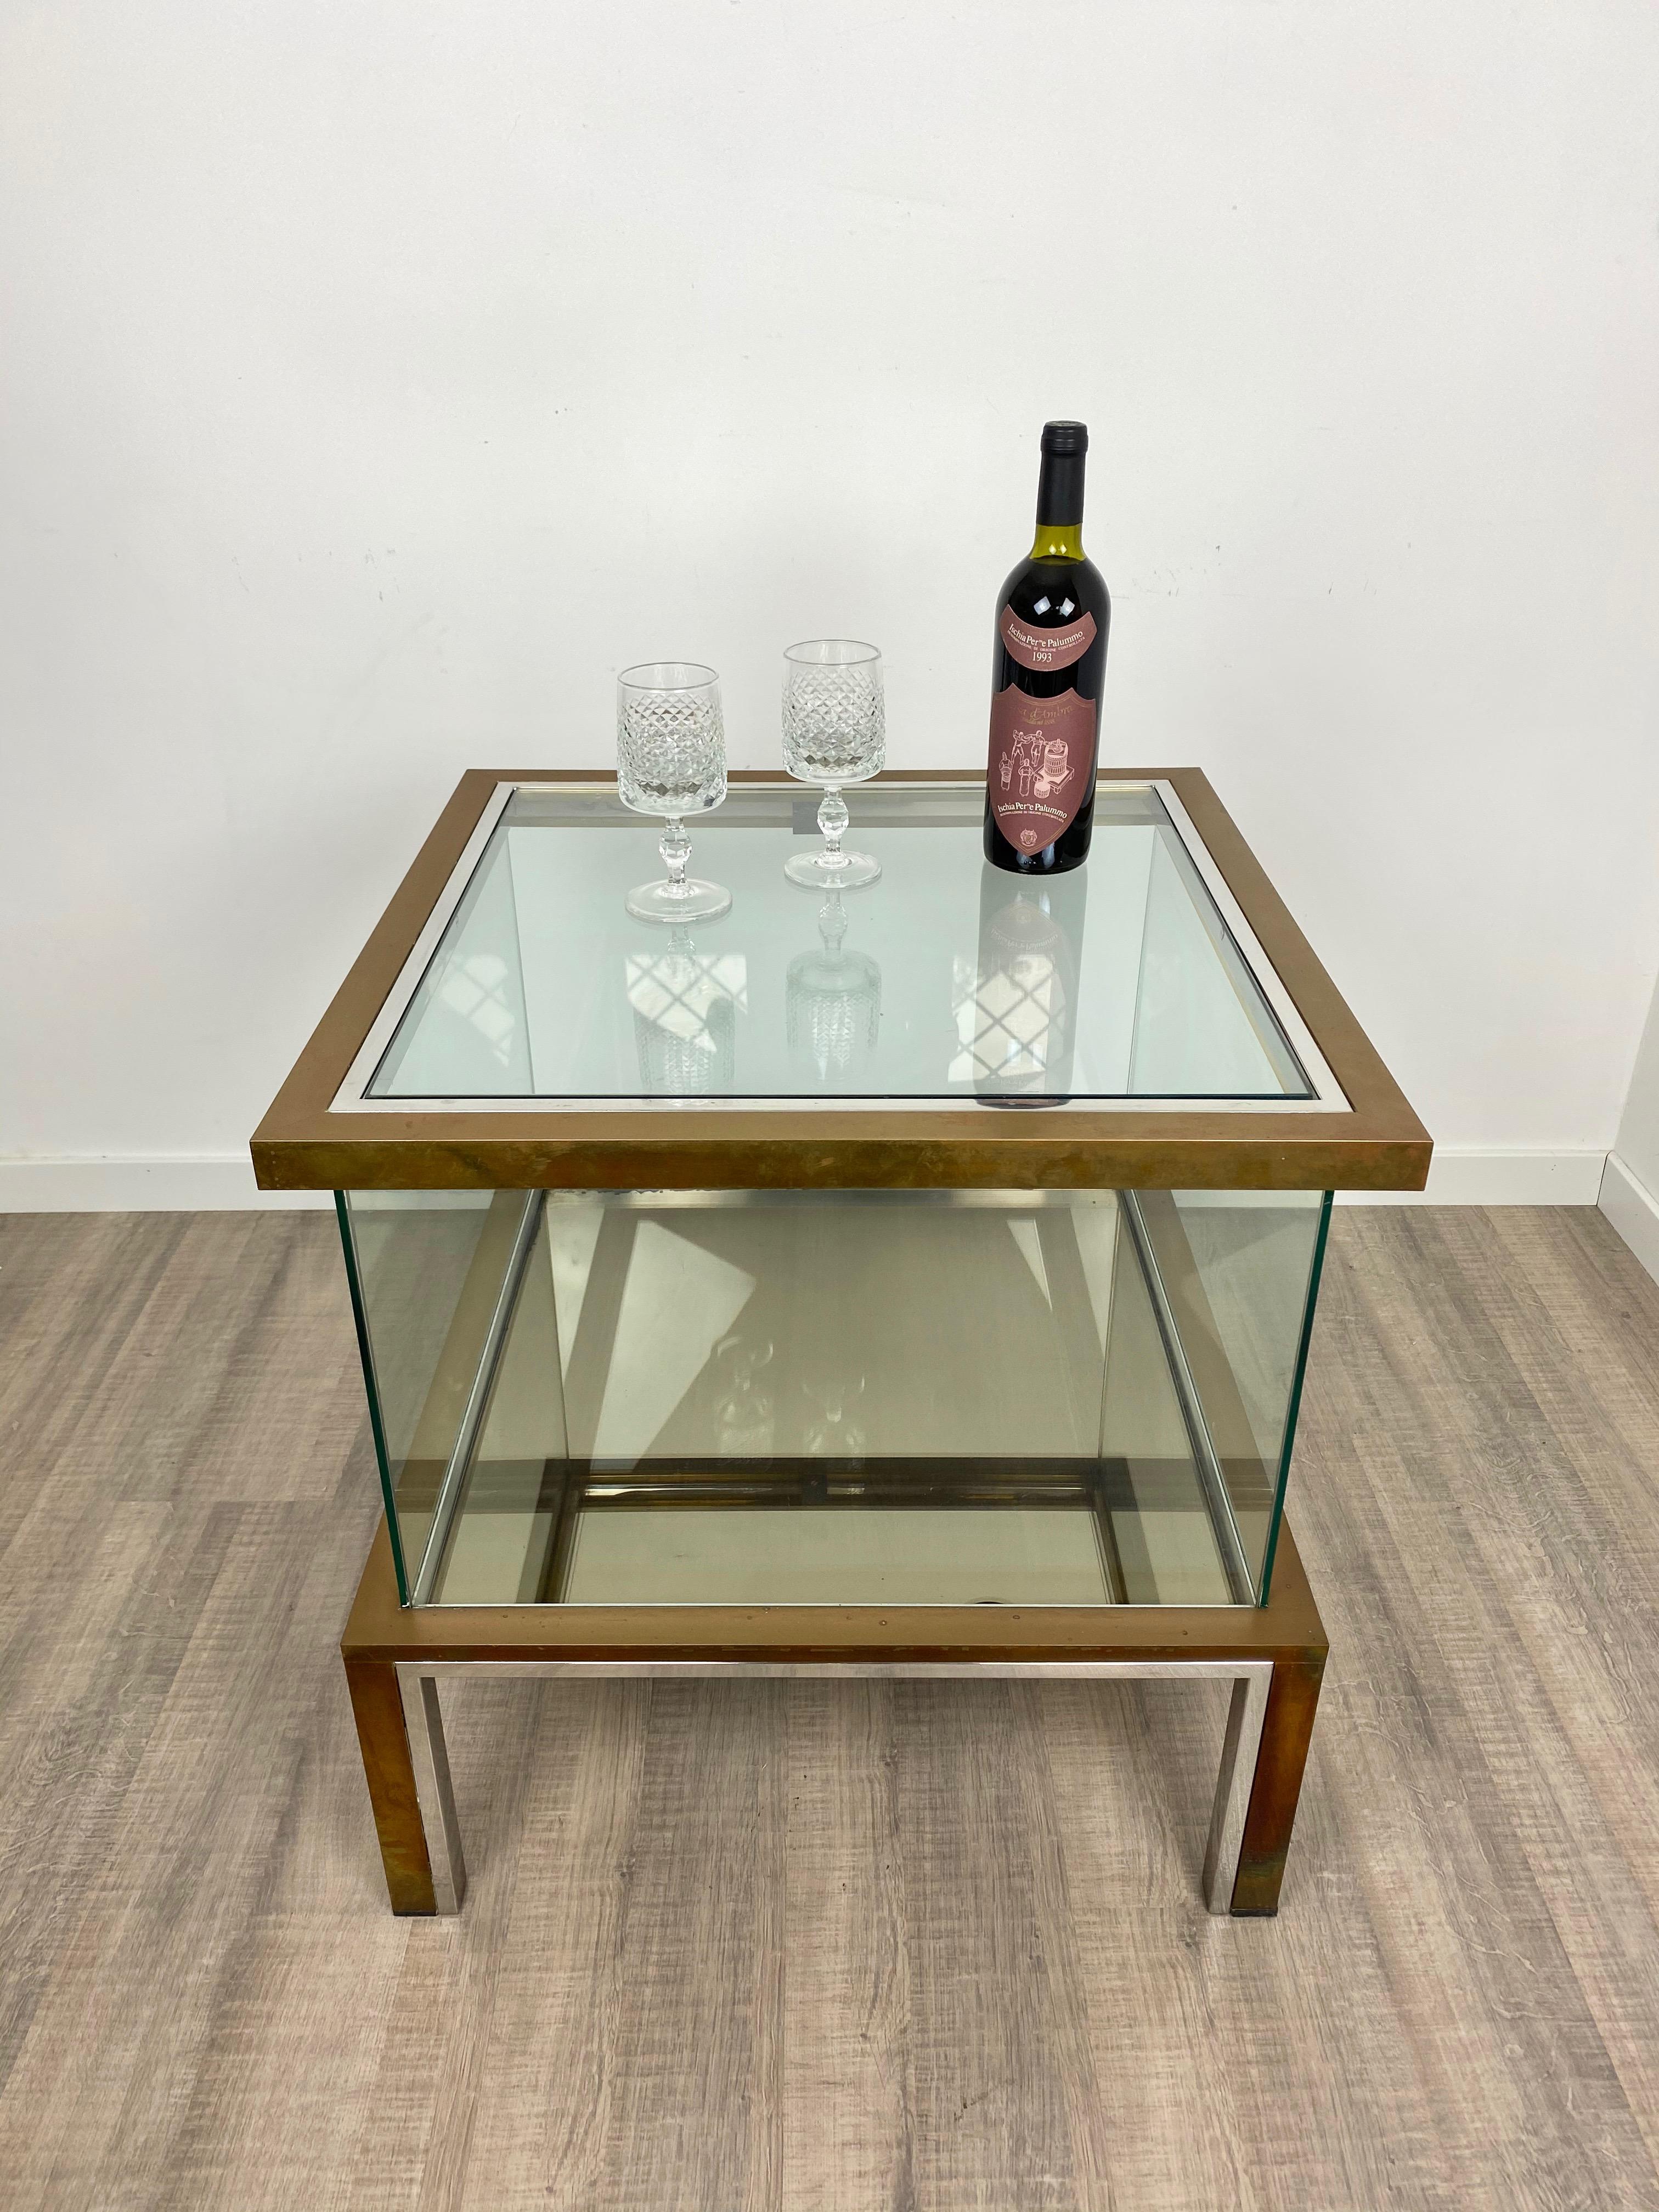 Romeo Rega Coffee Side Bar Cabinet Table in Chrome Brass and Glass, Italy, 1970s For Sale 3